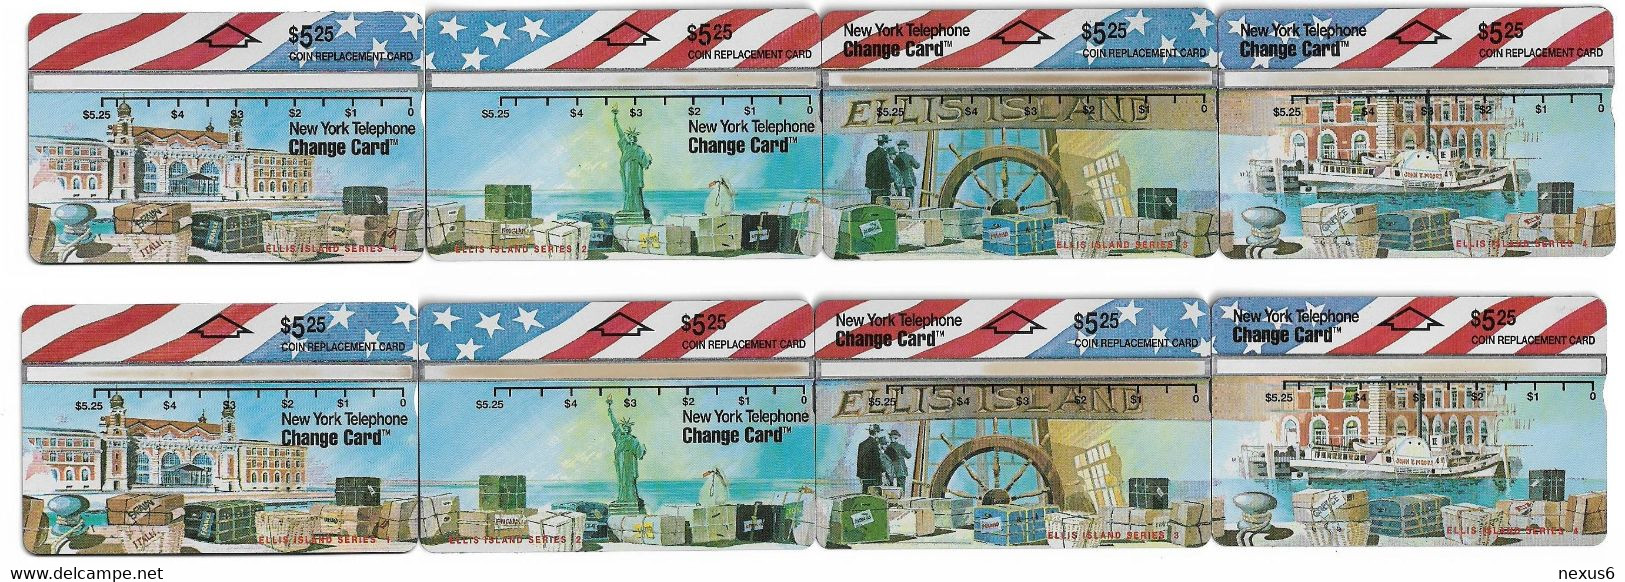 USA - Nynex (L&G) - 2 Full Puzzle Sets Ellis Island (ALL Batch Numbers), 1993, 5.25$, All Mint - Cartes Holographiques (Landis & Gyr)